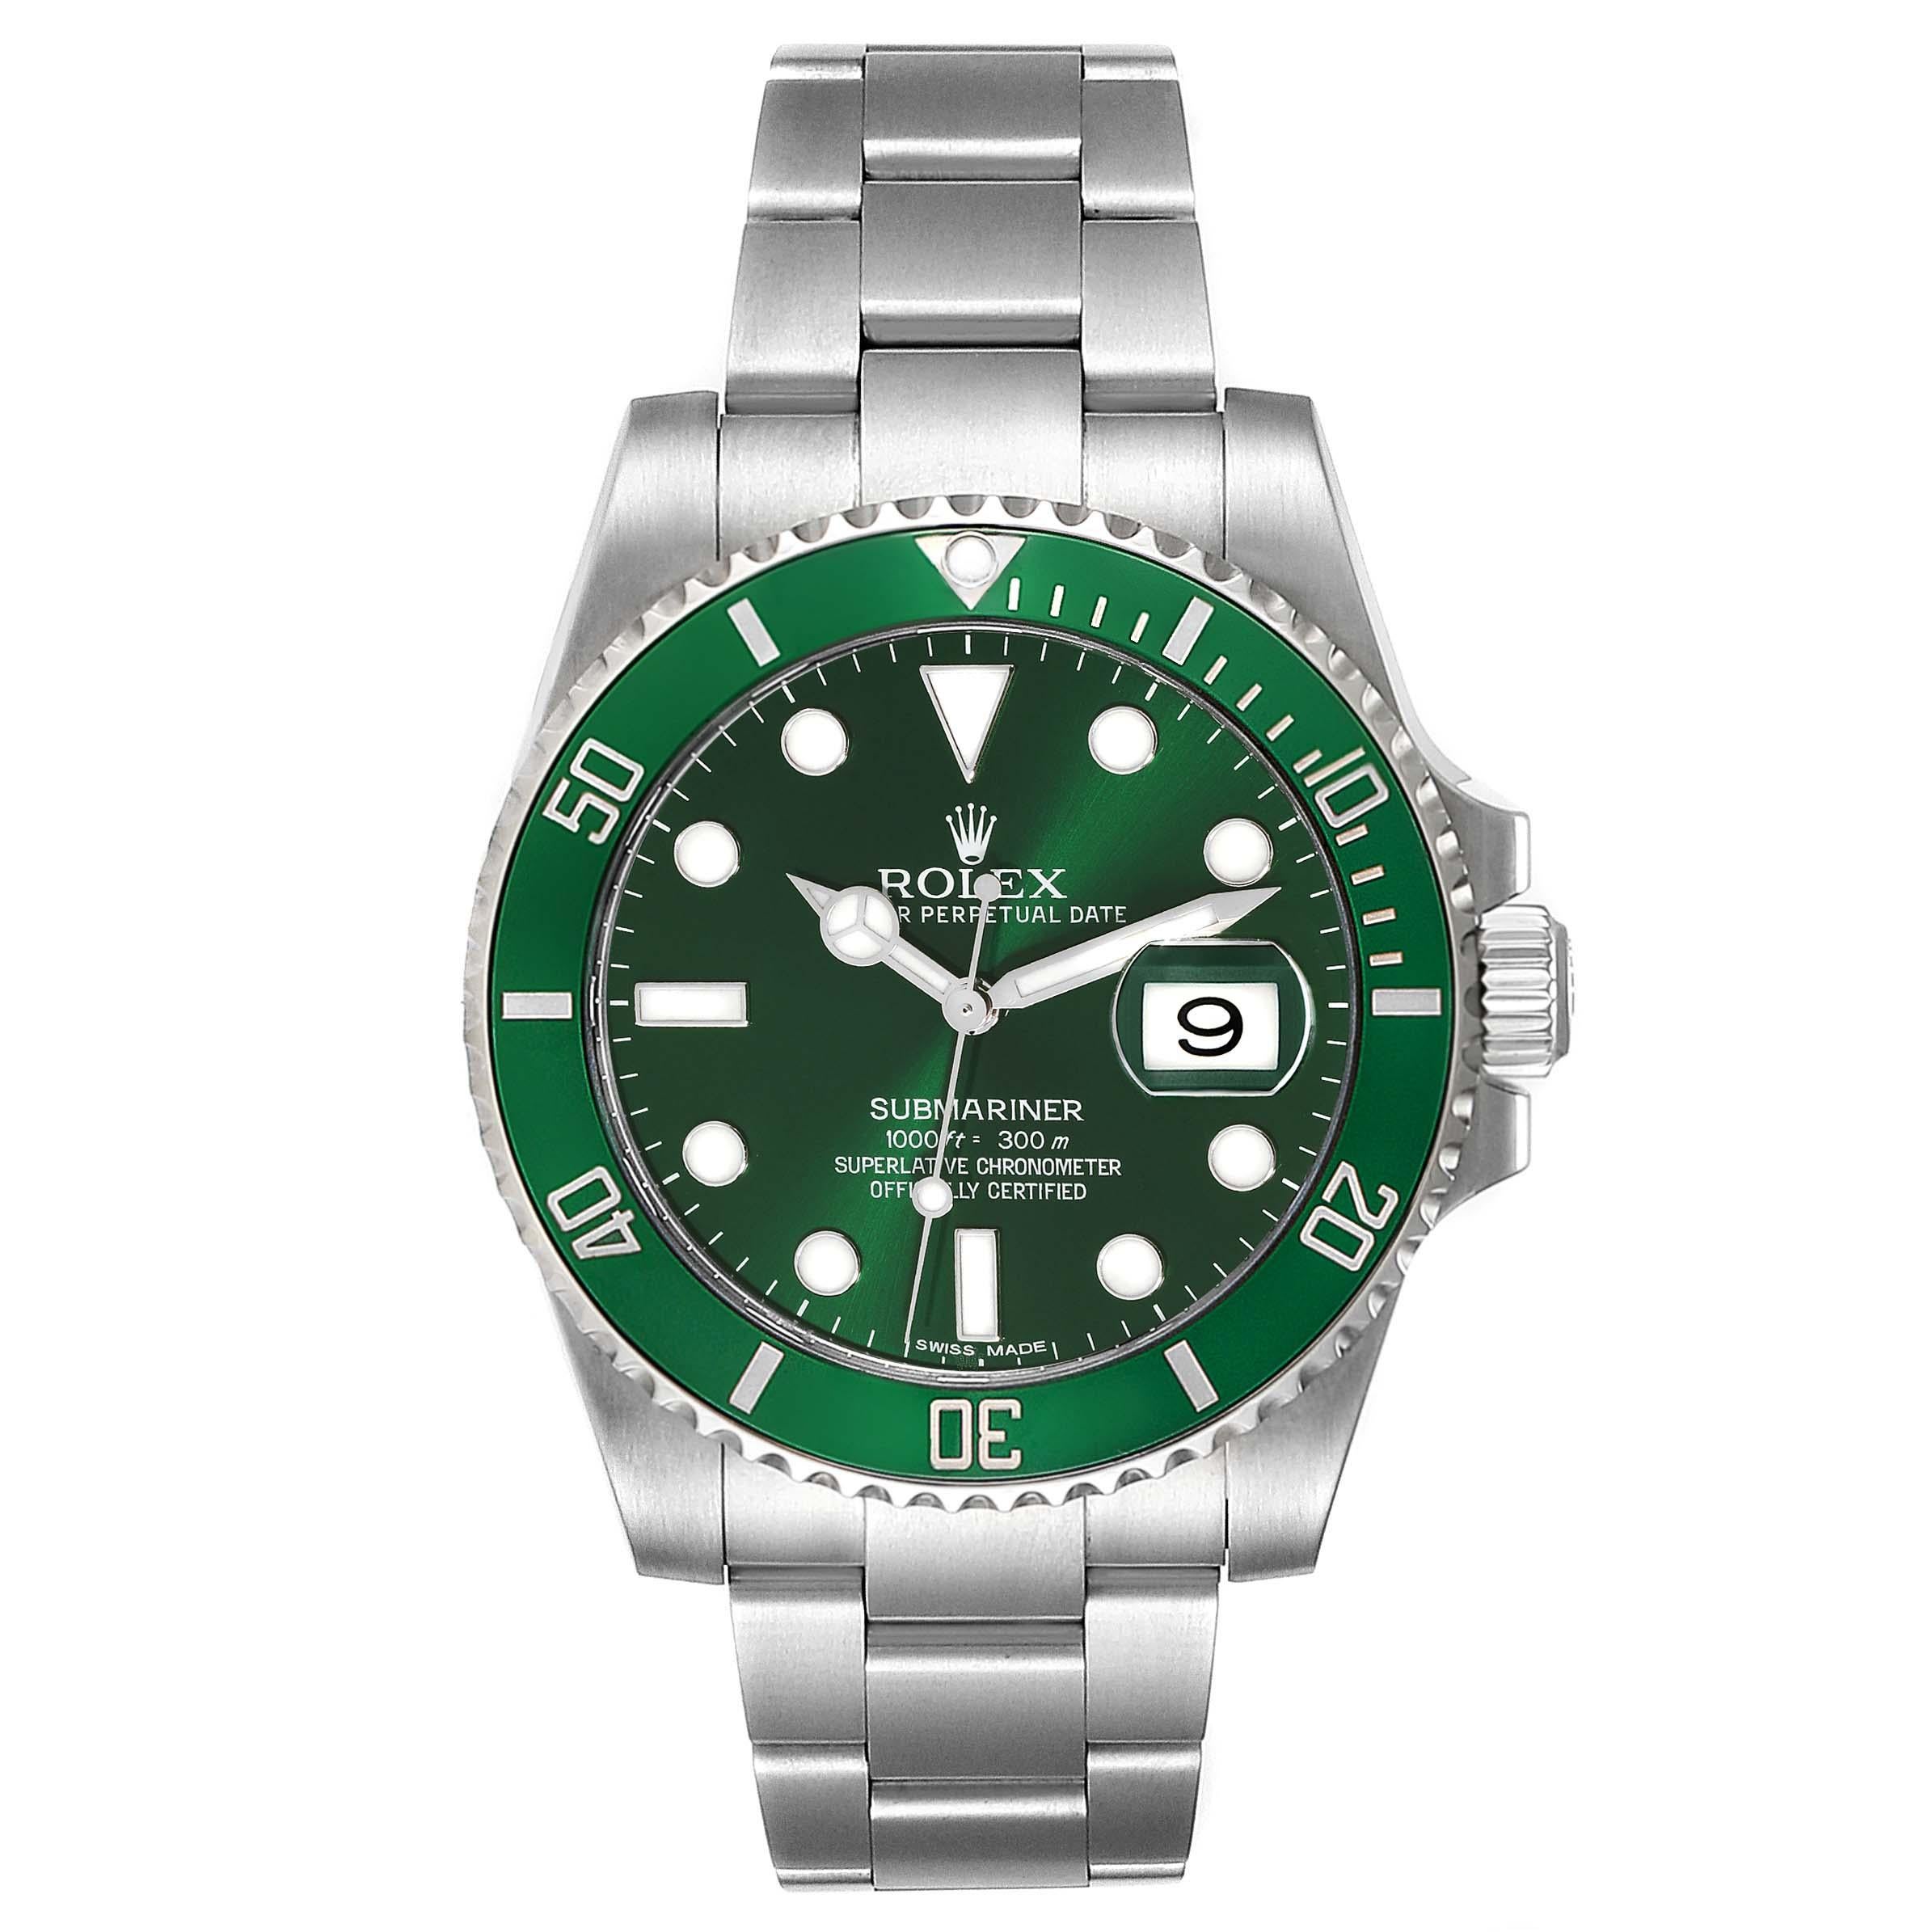 Rolex Submariner Hulk Green Dial Steel Mens Watch 116610LV Box Card. Officially certified chronometer automatic self-winding movement. Oyster case 40 mm in diameter. Rolex logo on the crown. Special time-lapse unidirectional rotating green ceramic